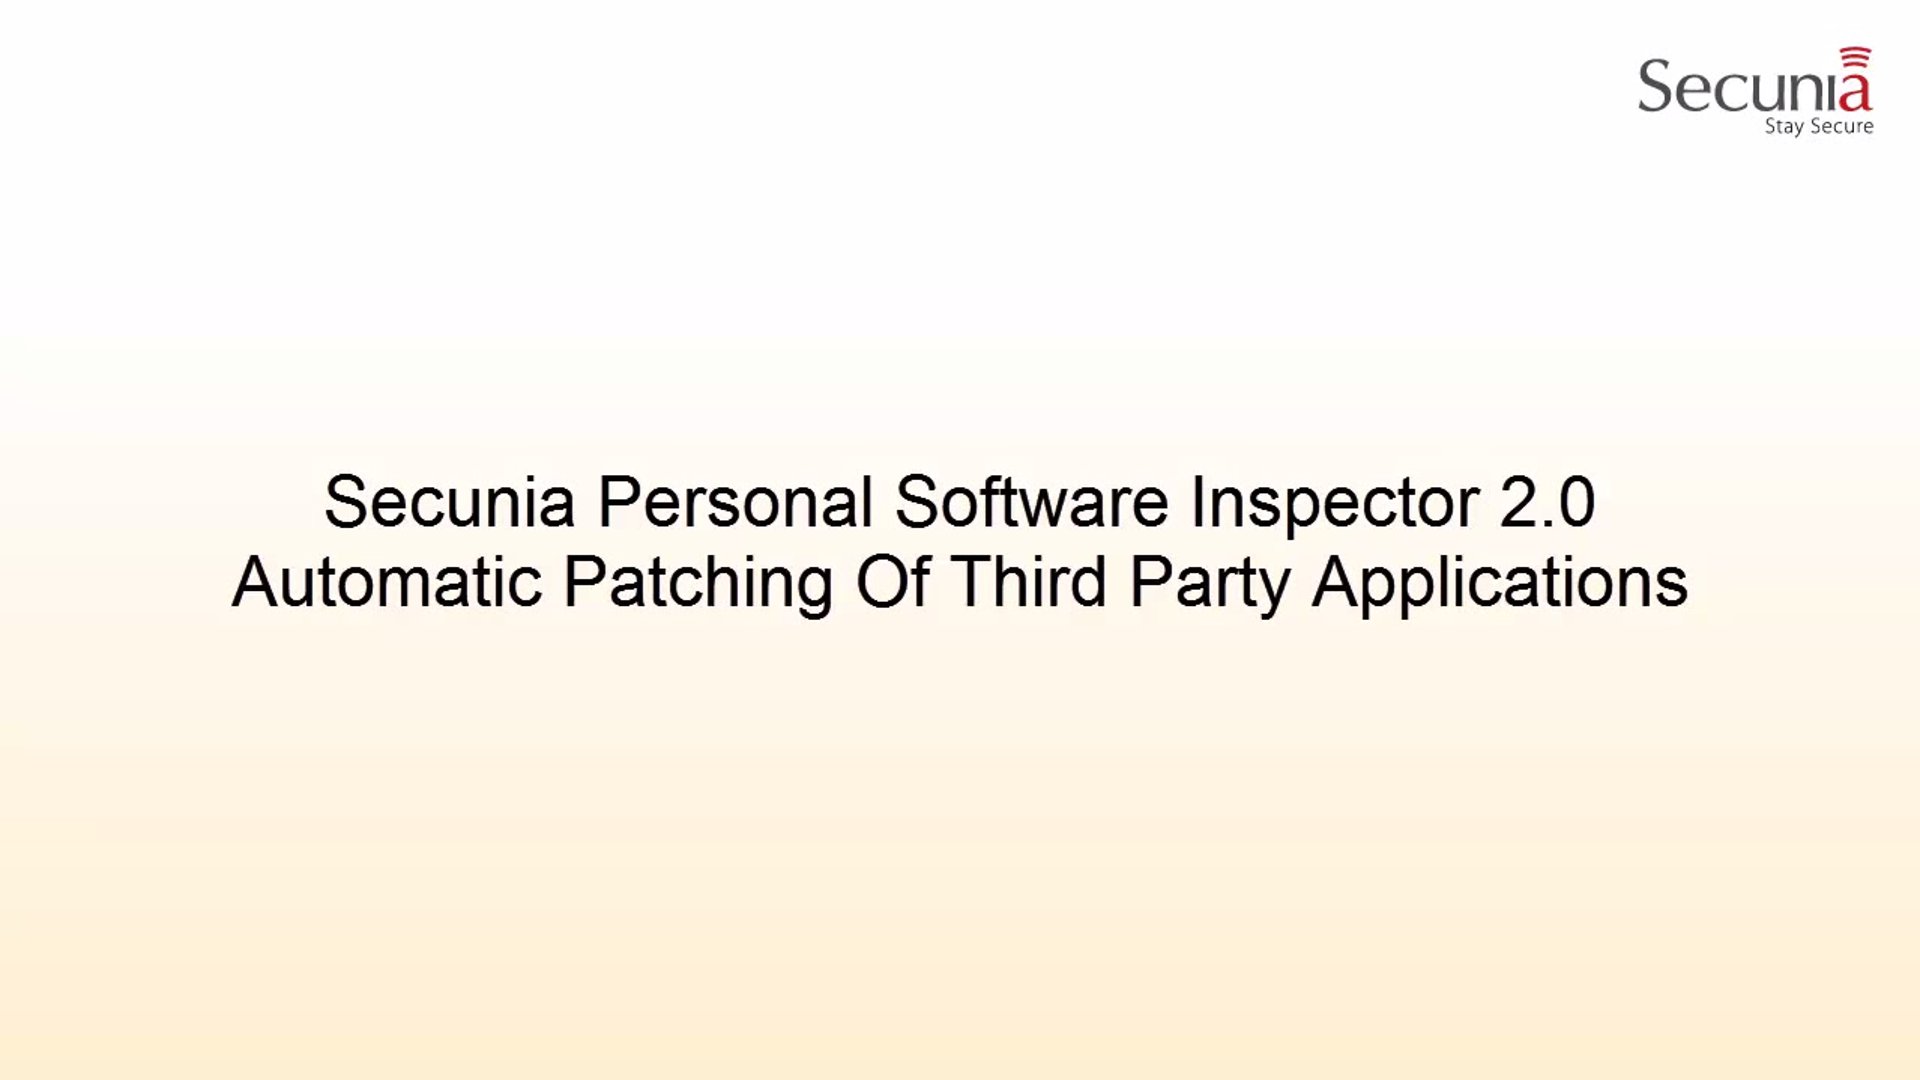 Secunia Personal Software Inspector 2.0